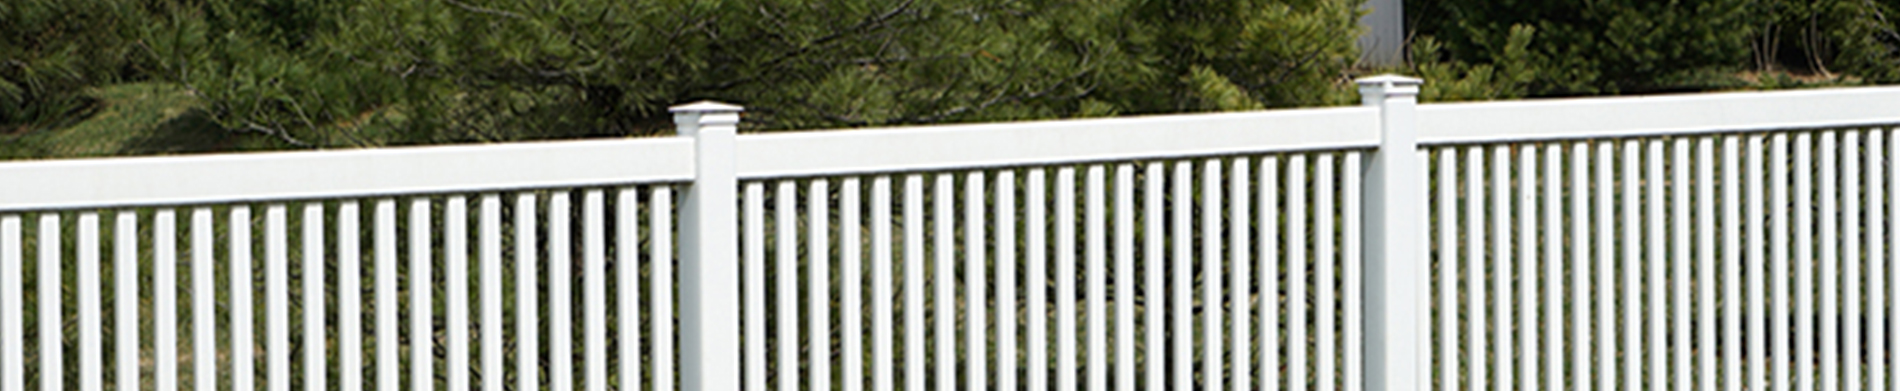 Know Why Californians Love Vinyl Fencing